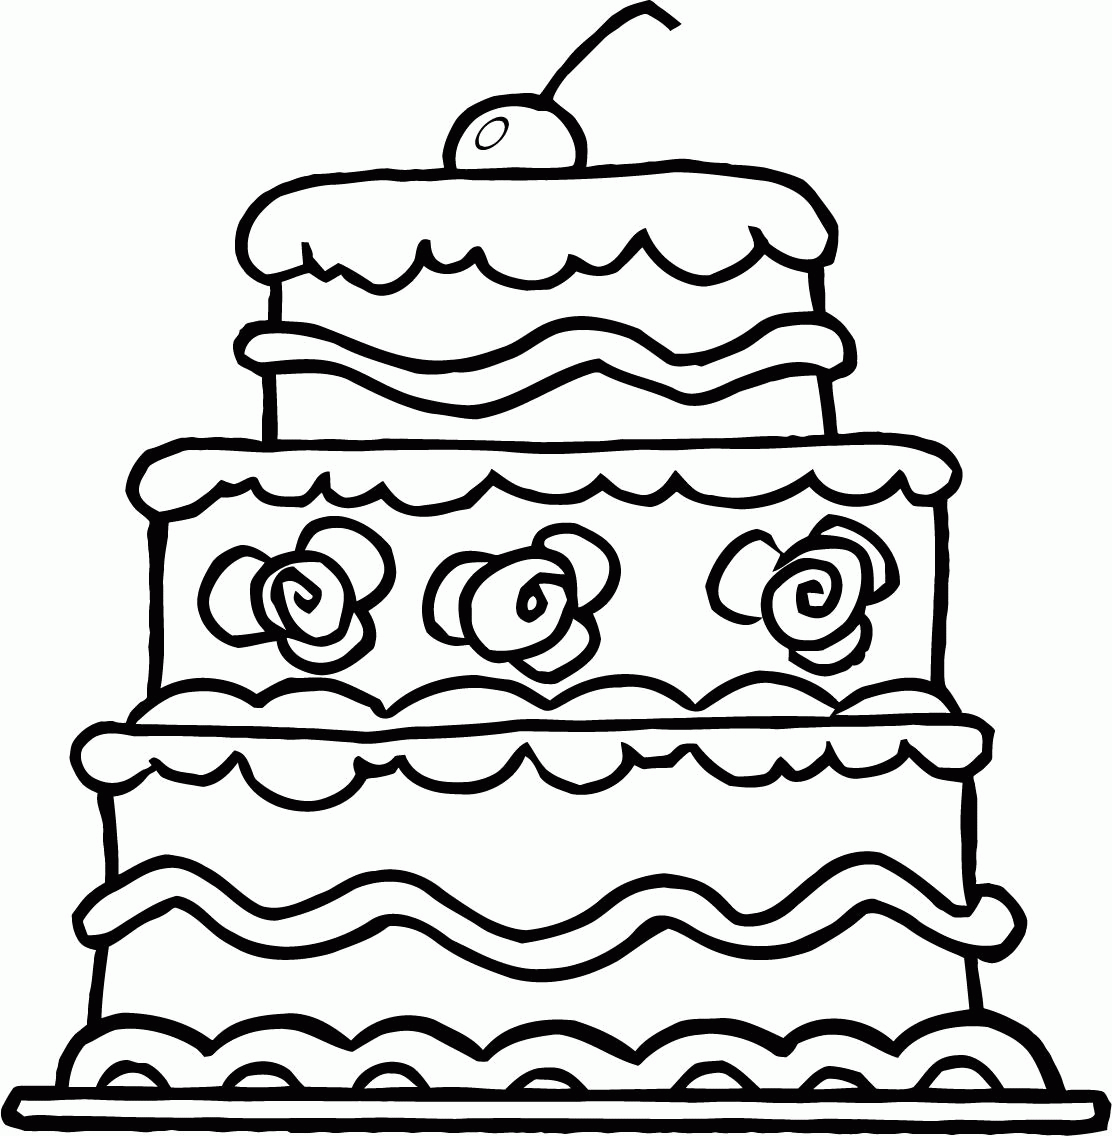 Cake Coloring Page - Coloring Home